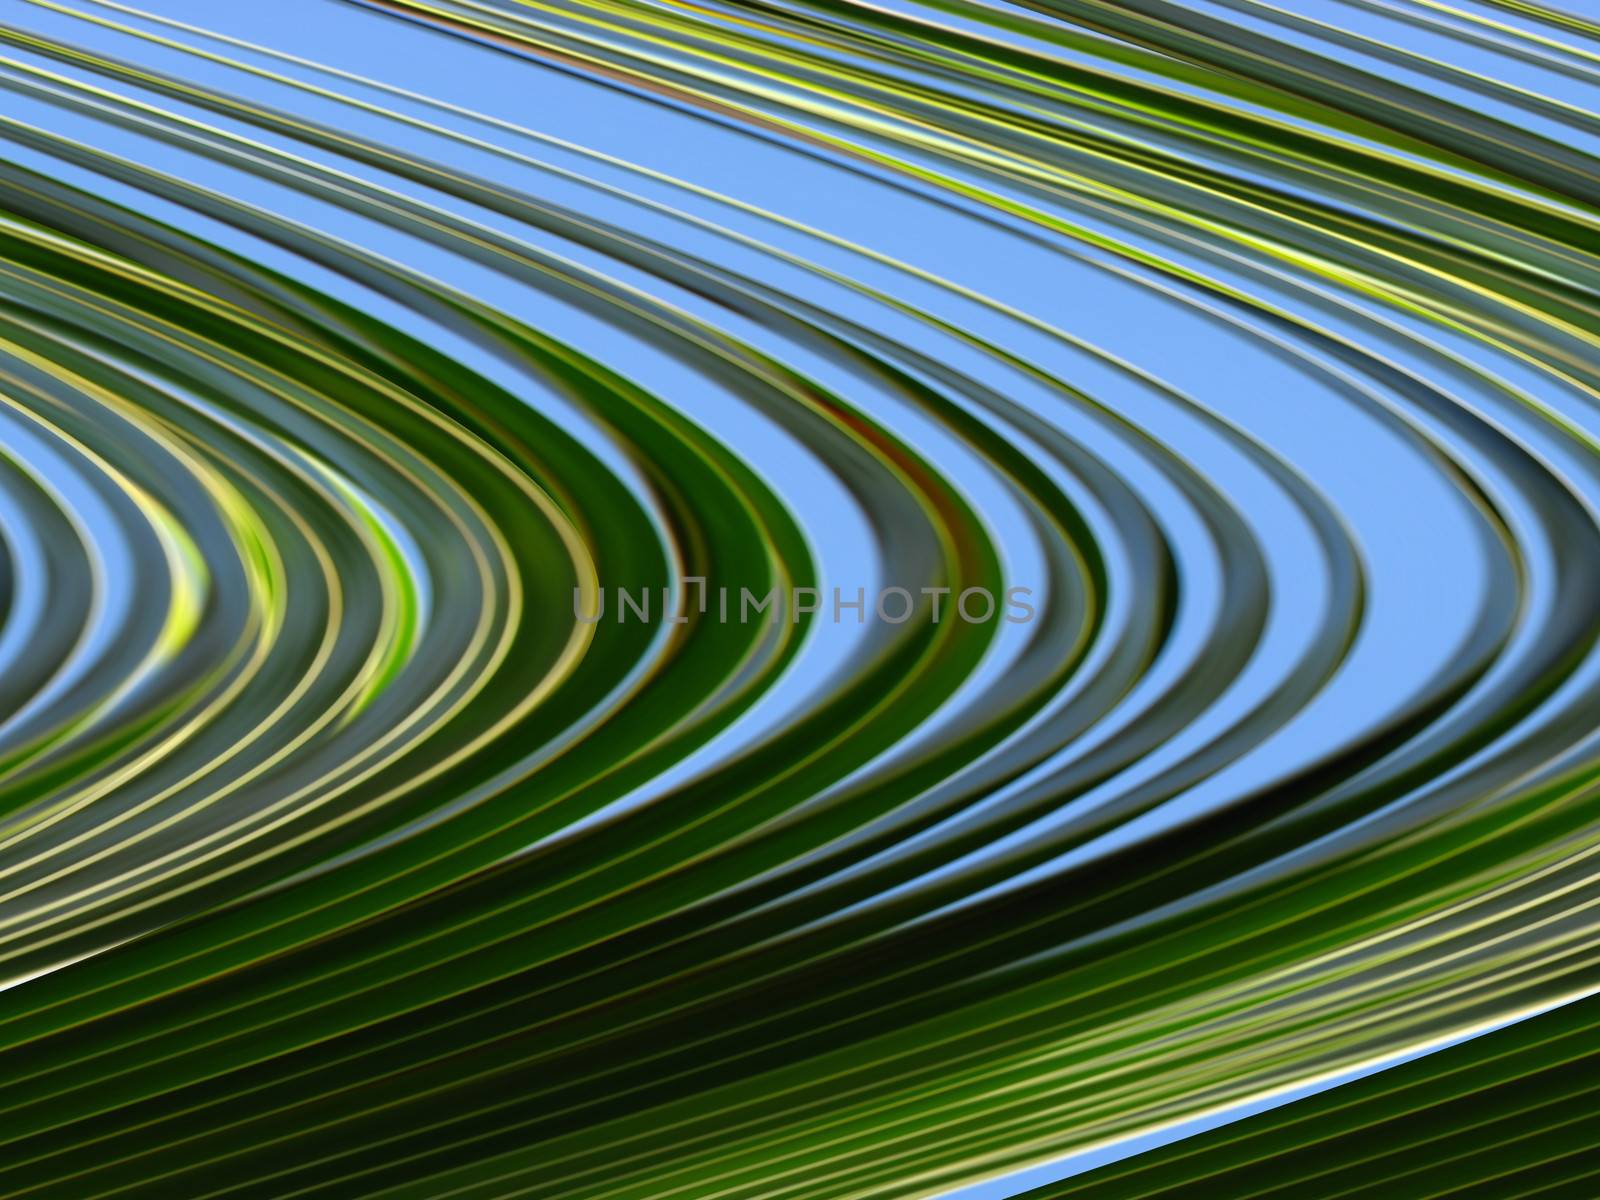 Curvy Palm Leaves by thefinalmiracle